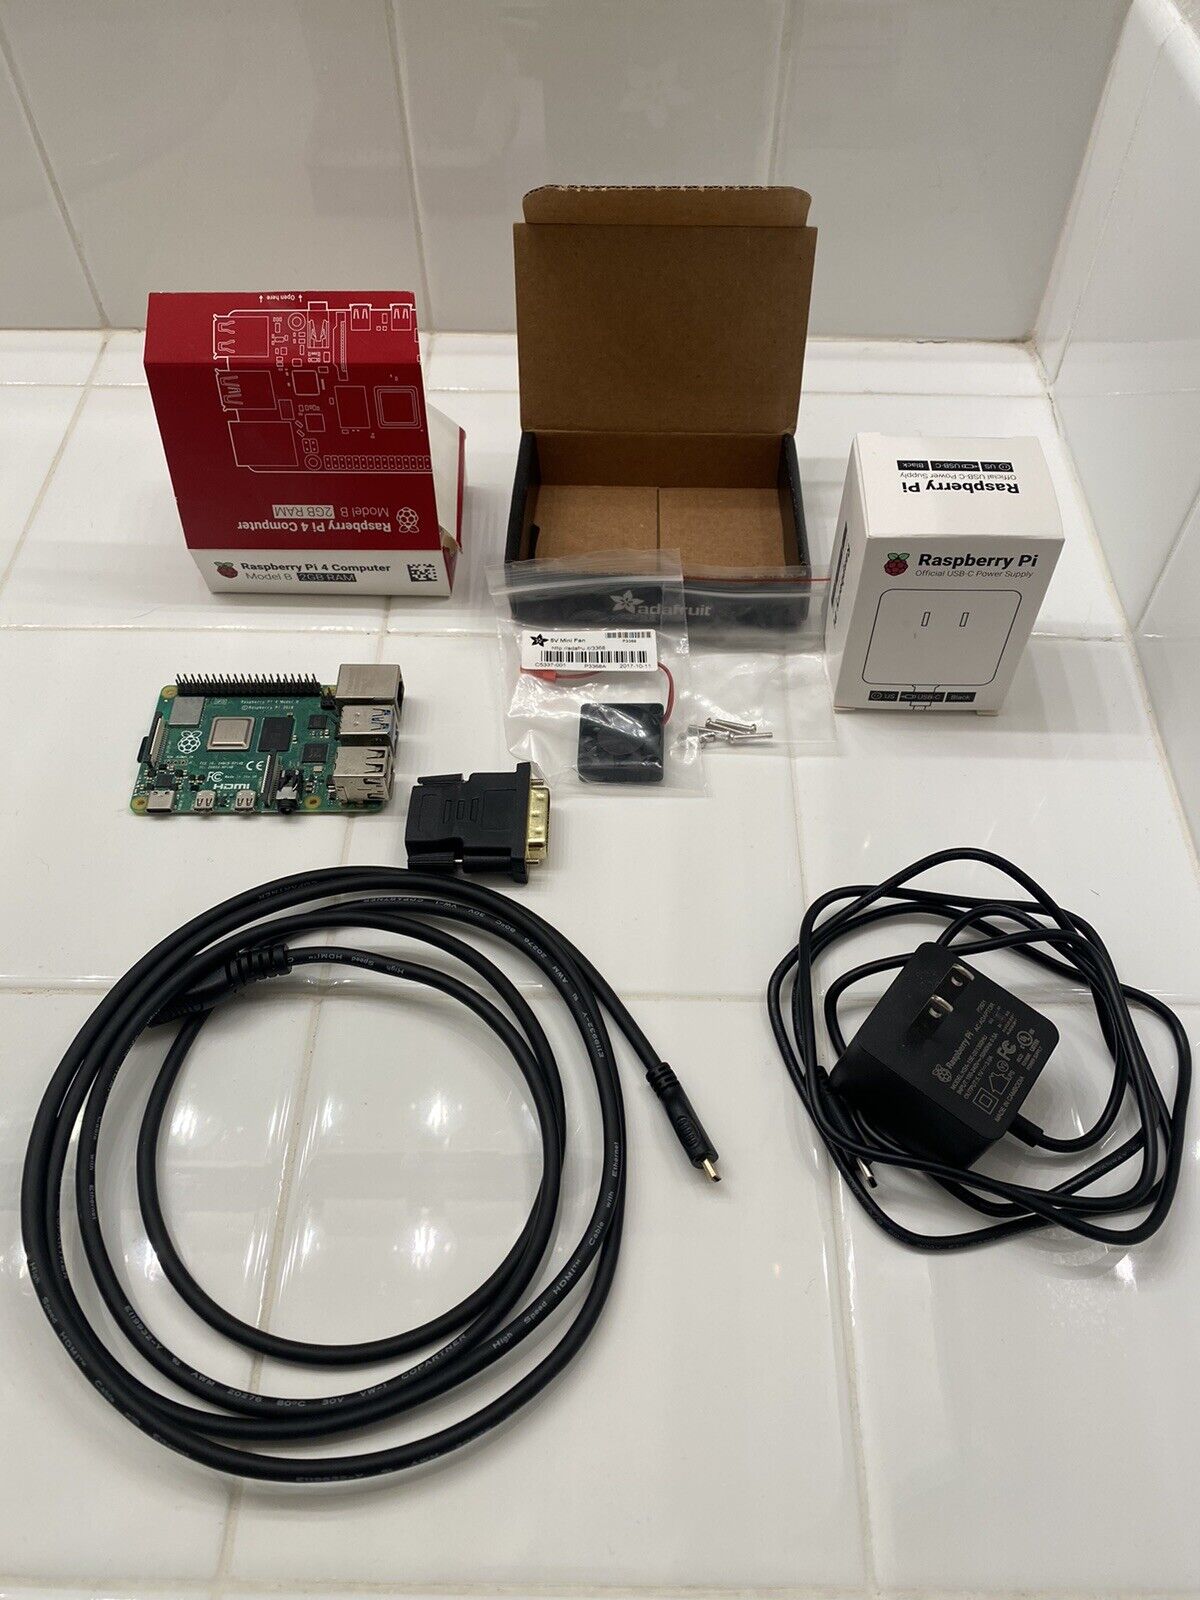 Raspberry Pi 4 Model B 2GB With Power Supply, 32GB Micro SD,Fan, HDMI And More